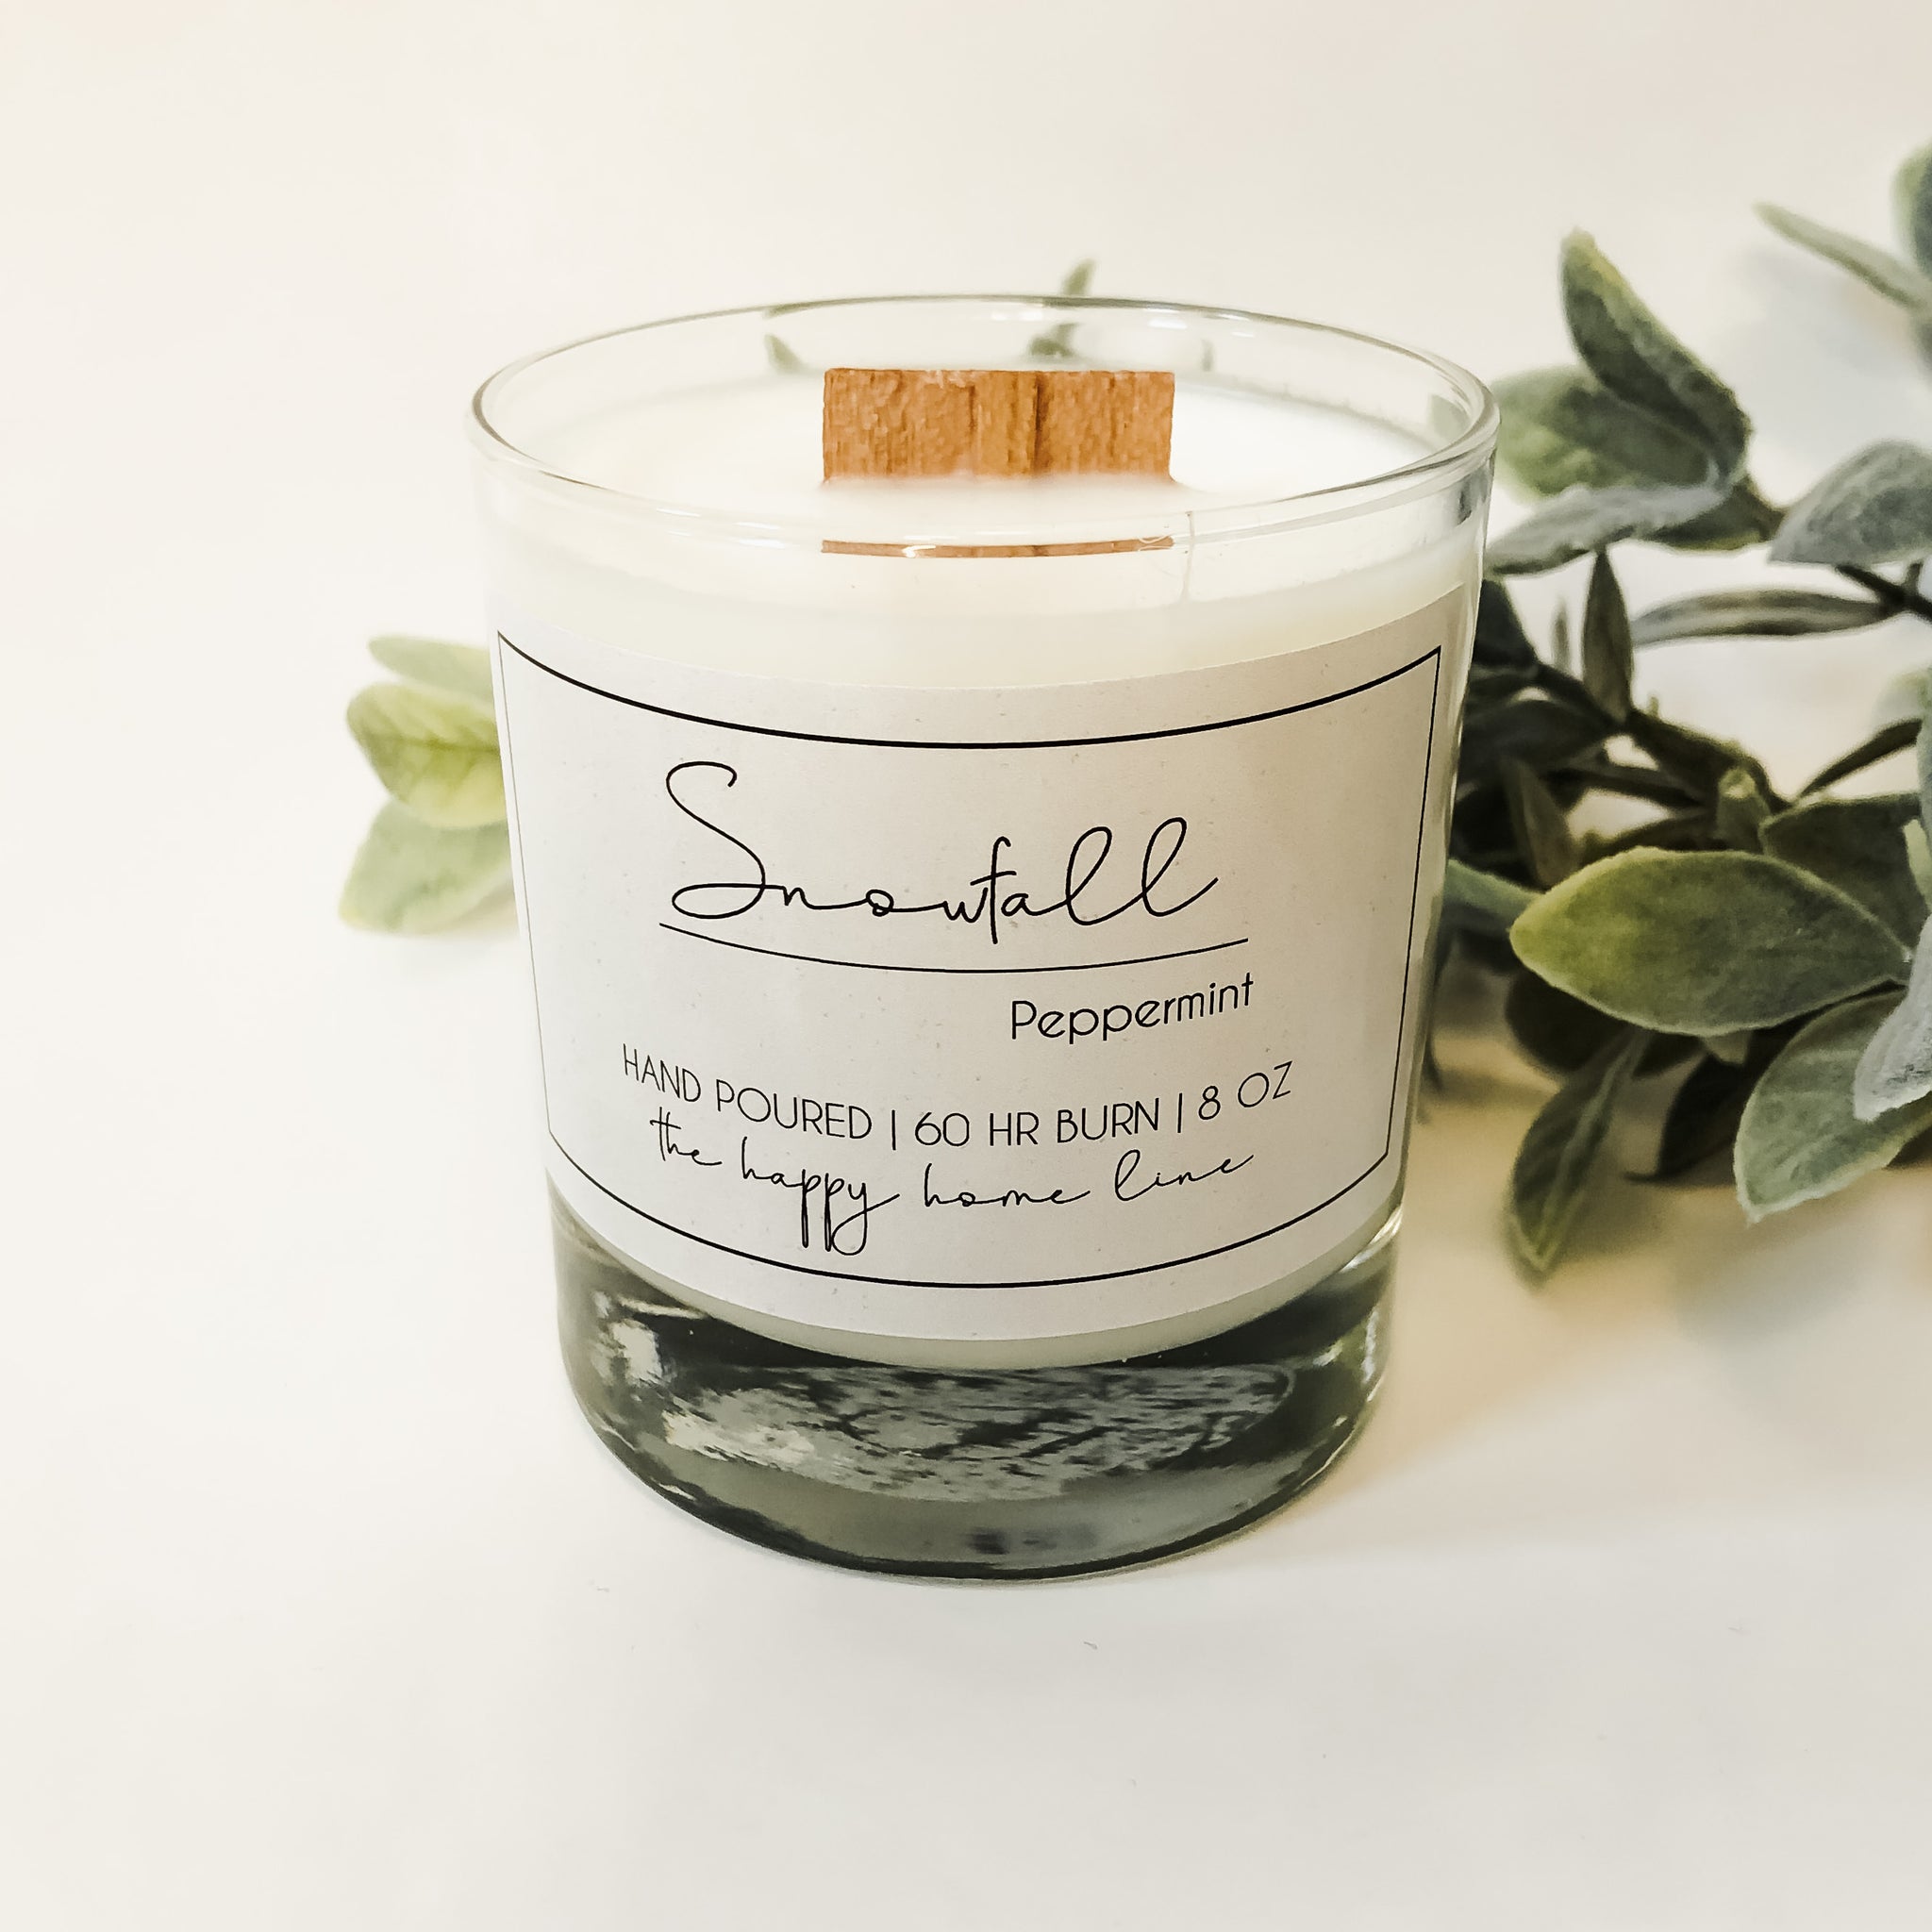 Snowfall Peppermint Wood Wick Candle